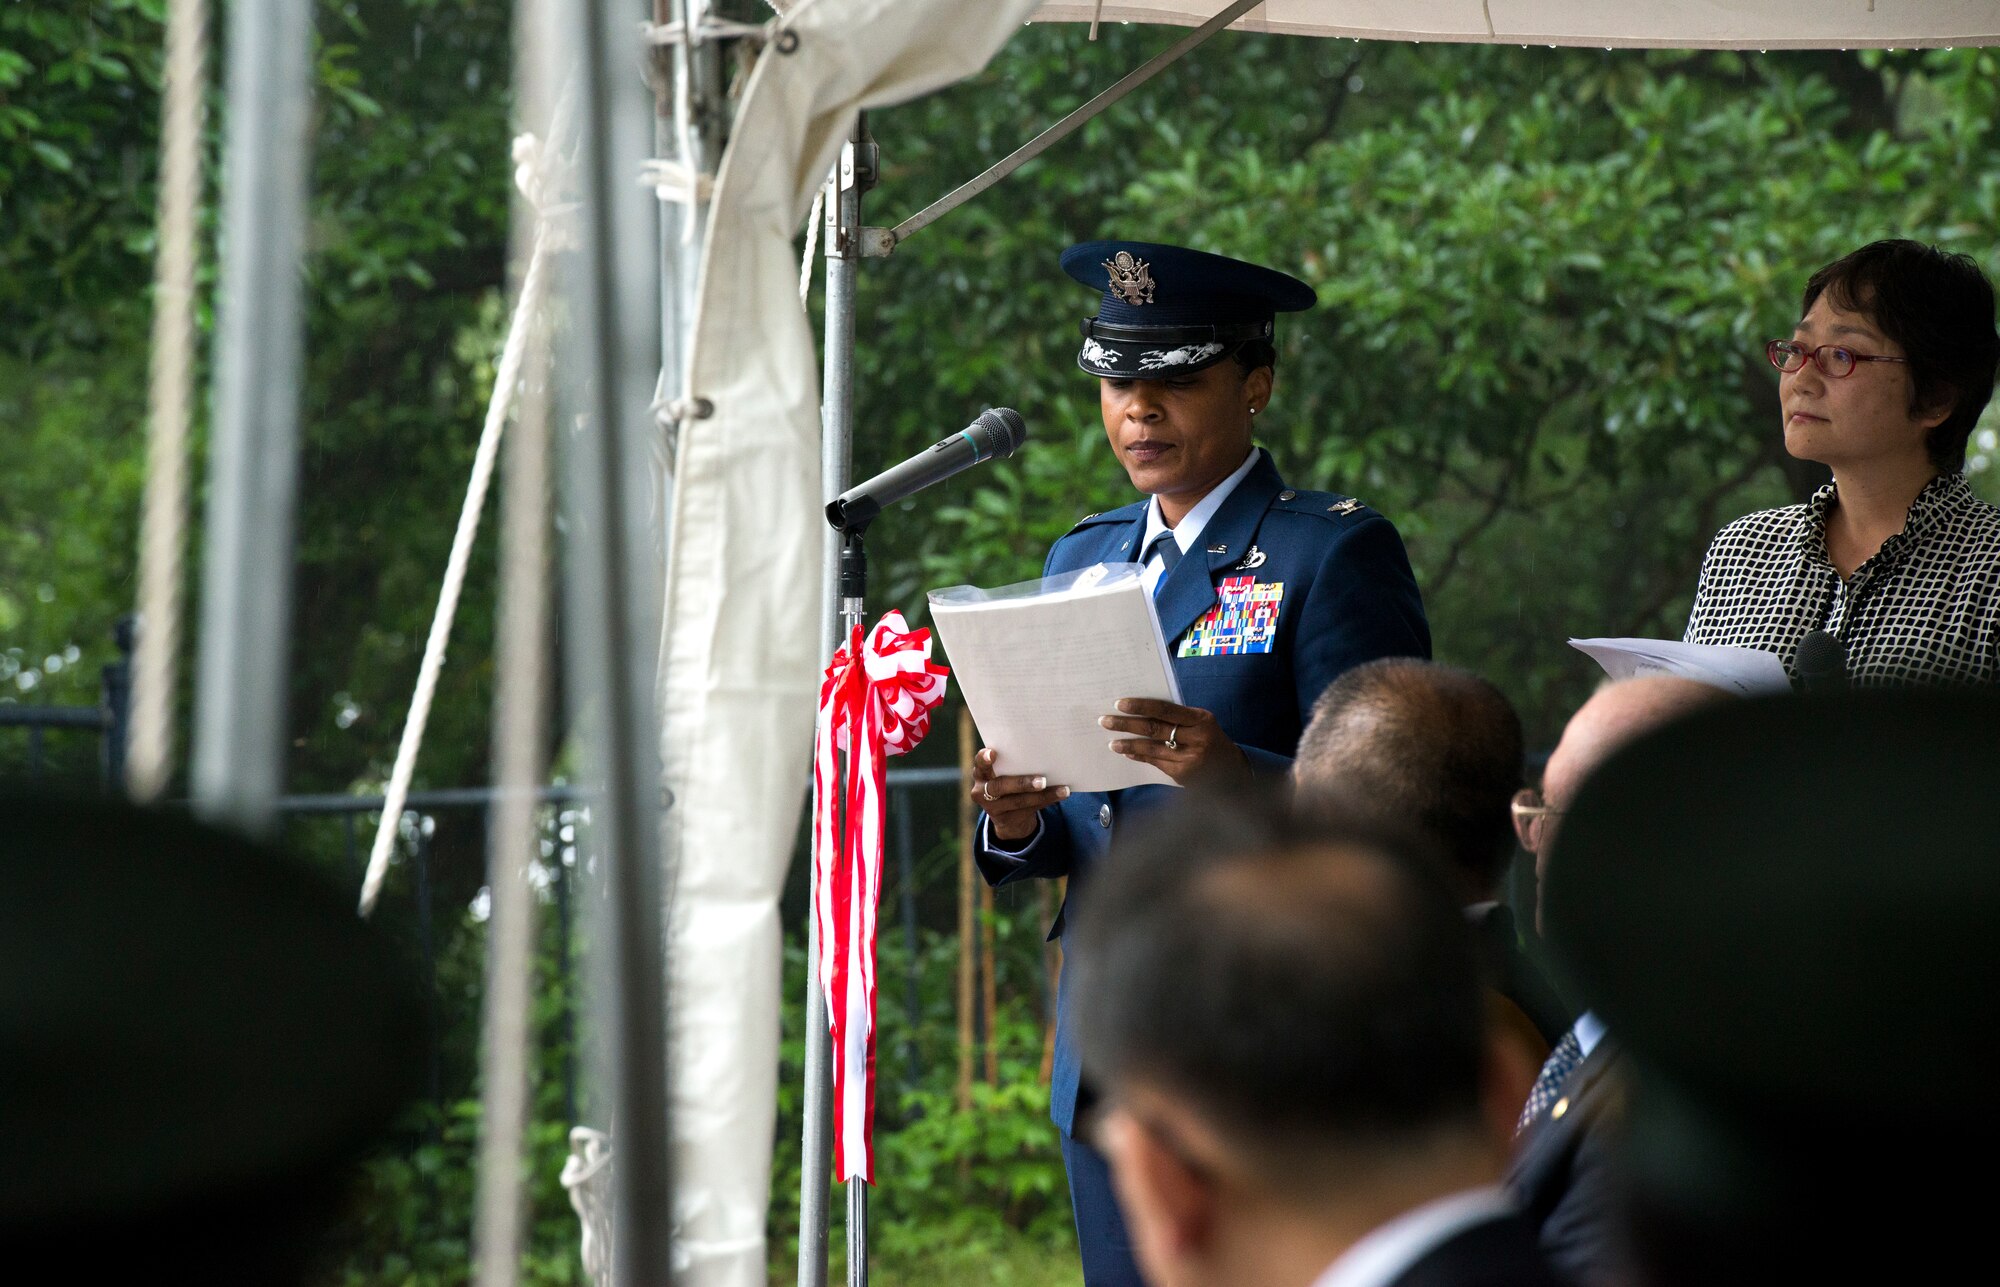 U.S. Air Force Col. Tanya J. Anderson, 374th Mission Support Group commander, speaks during the B-29 Memorial Ceremony